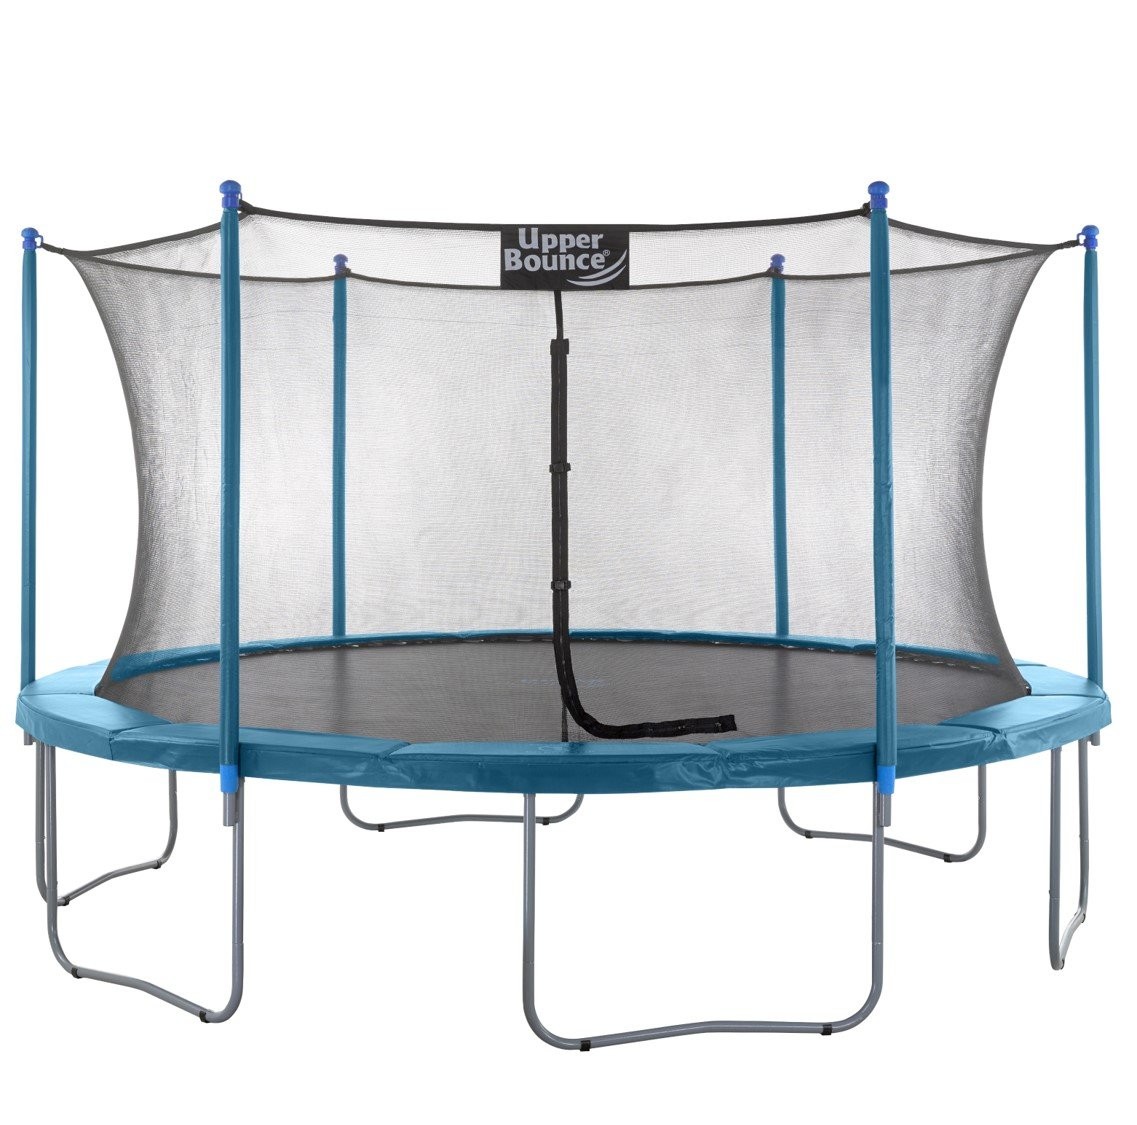 16Ft Large Trampoline and Enclosure Set | Garden & Outdoor Trampoline with Safety Net, Mat, Pad | Aquamarine